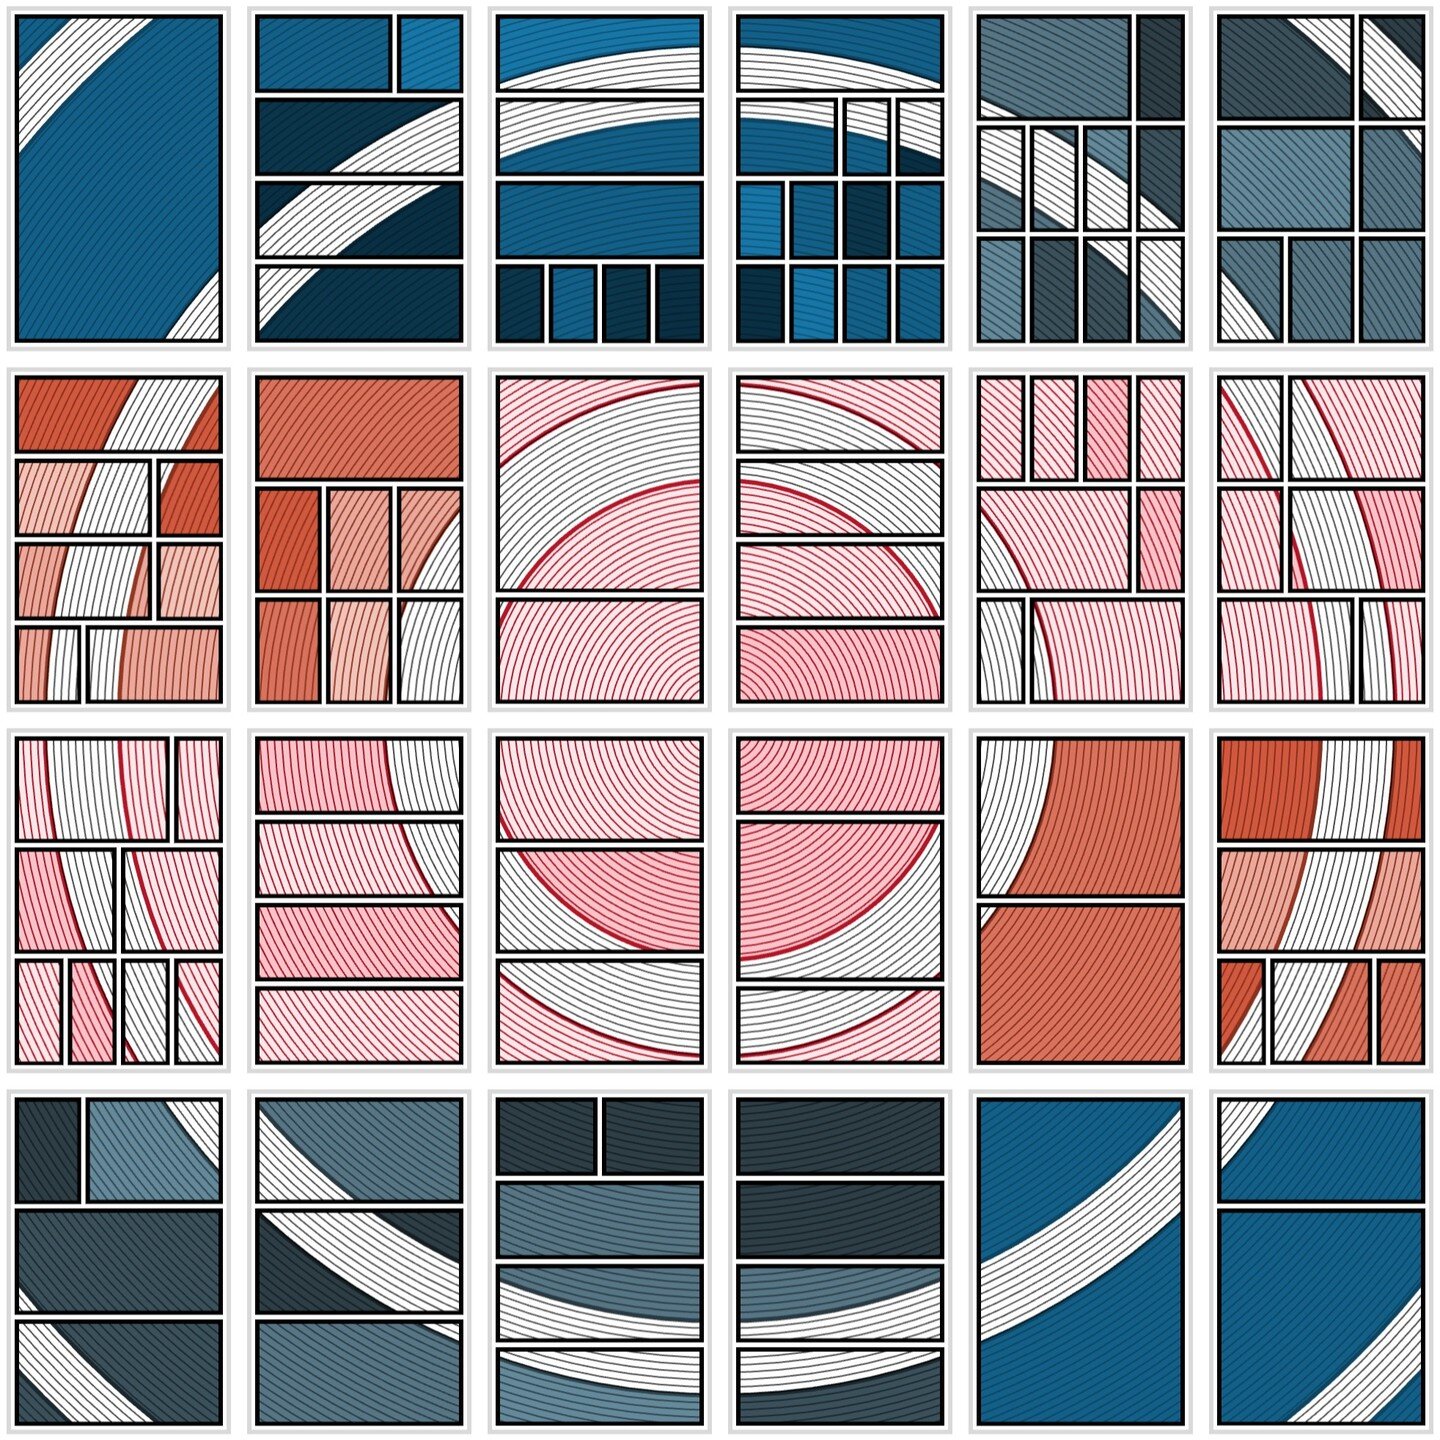 I'm experimenting with global shapes that span the entire story, providing a unifying effect. A circle works well, providing a point of convergence or divergence, and it is often used as a metaphor for the story cycle. I'm also refining the color pal